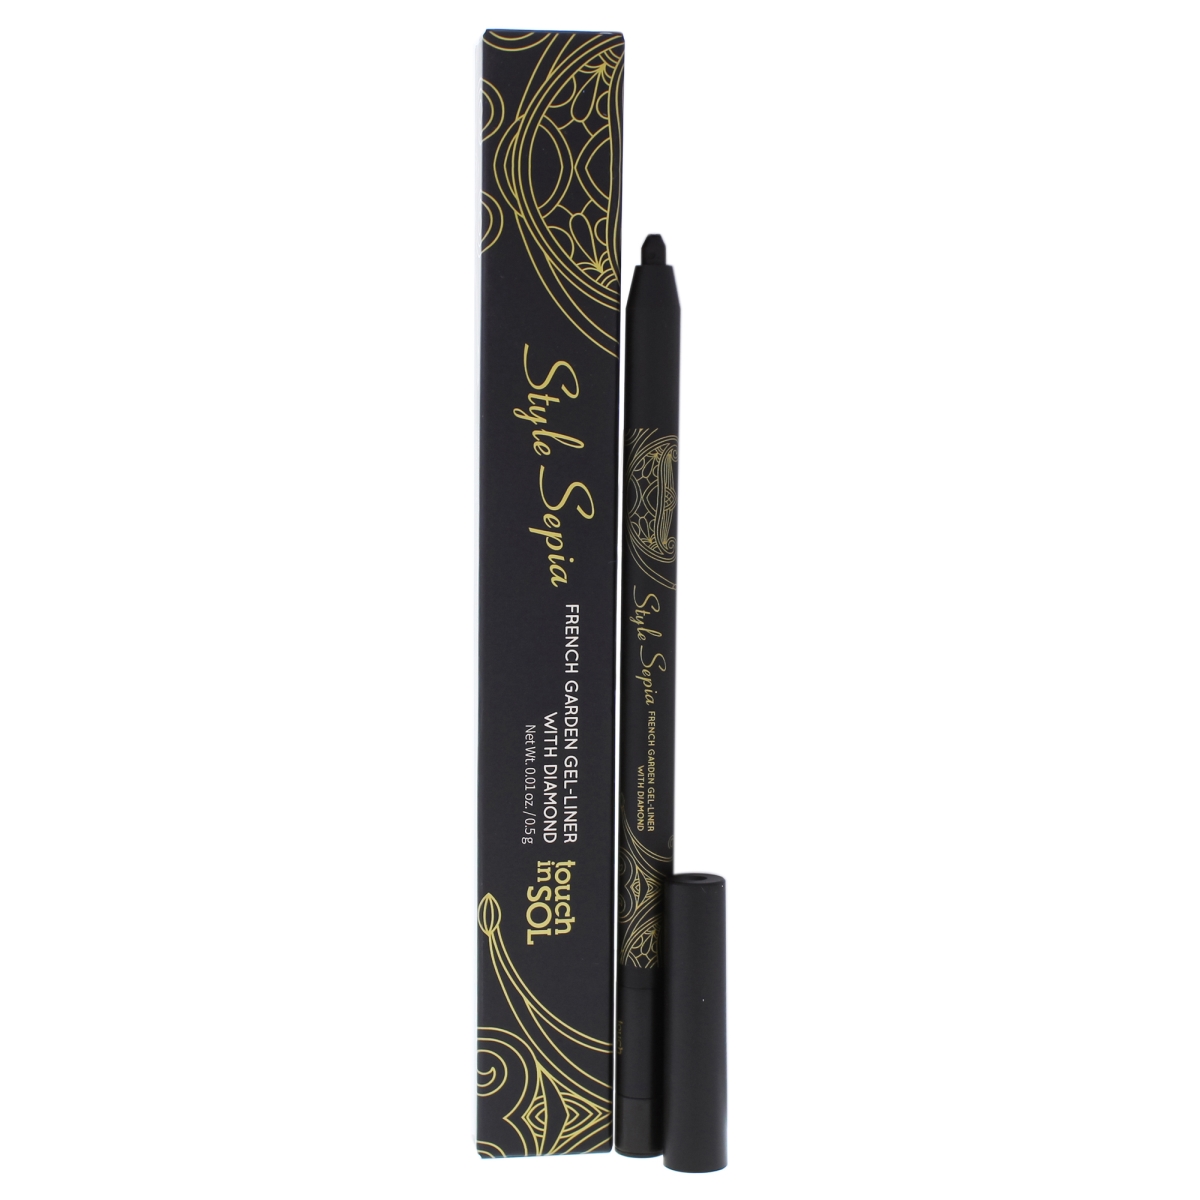 I0092068 Style Sepia French Garden Gel-liner With Diamond For Women - Chocolate - 0.03 Oz